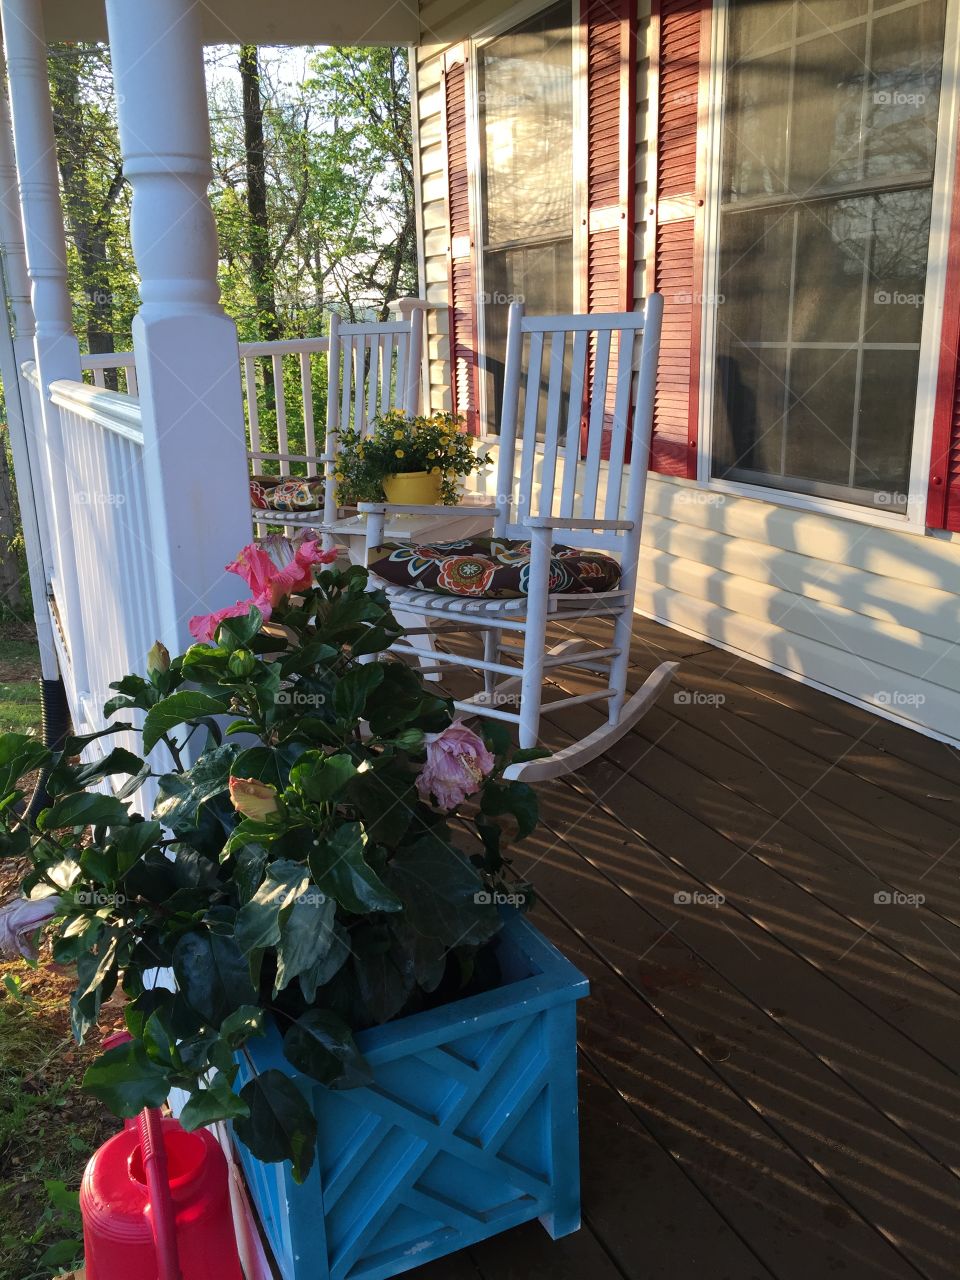 No Person, House, Flower, Chair, Patio